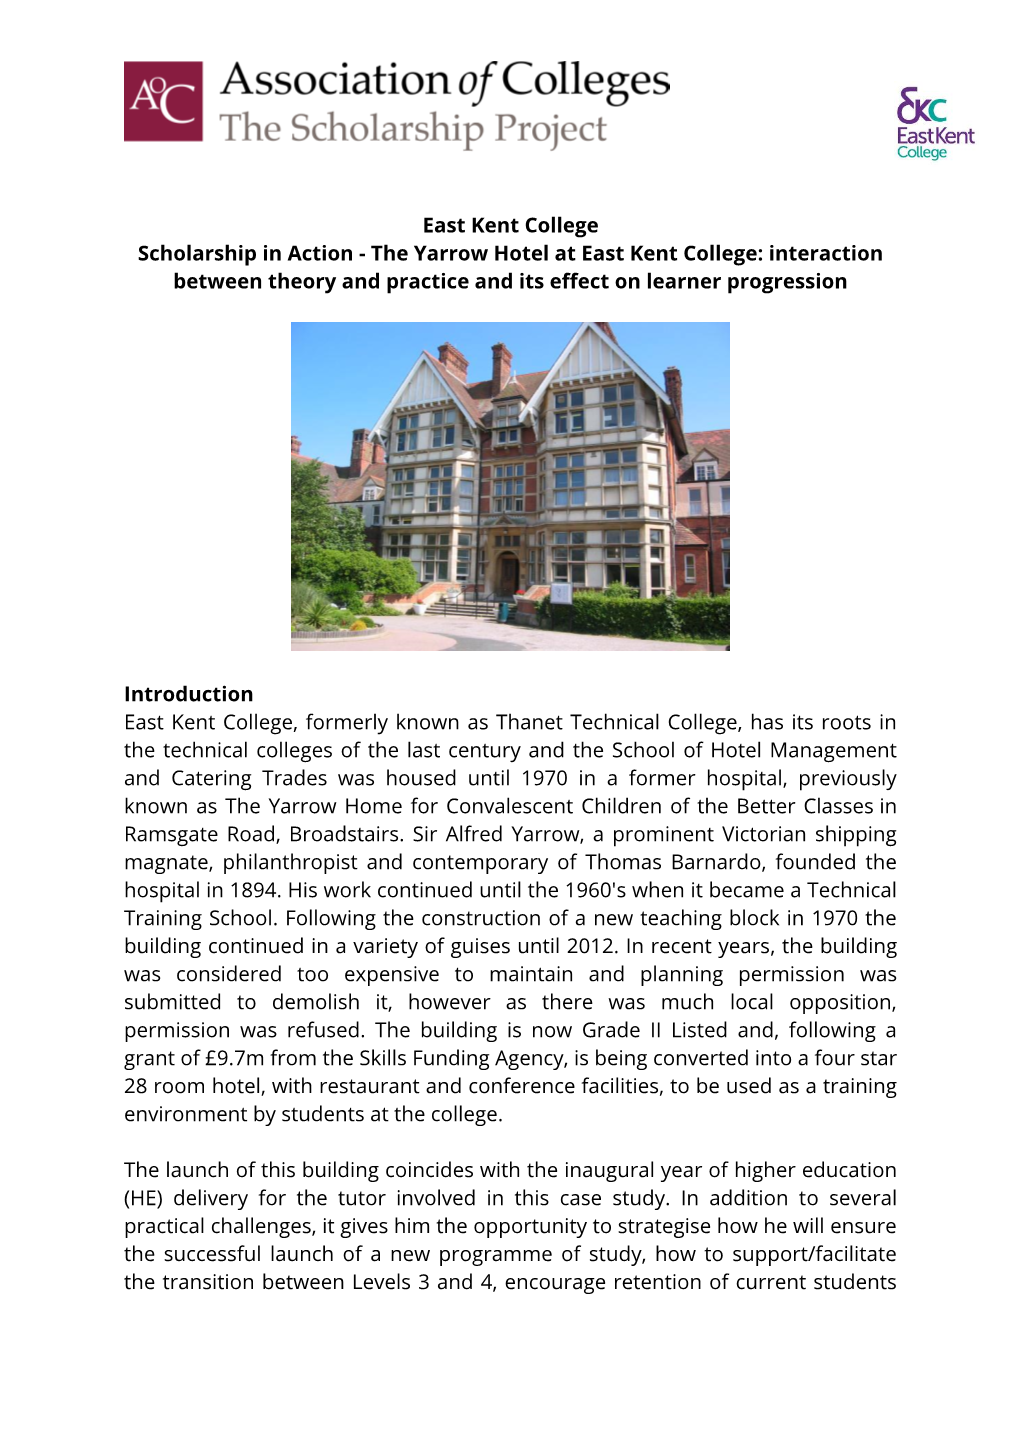 The Yarrow Hotel at East Kent College: Interaction Between Theory and Practice and Its Effect on Learner Progression